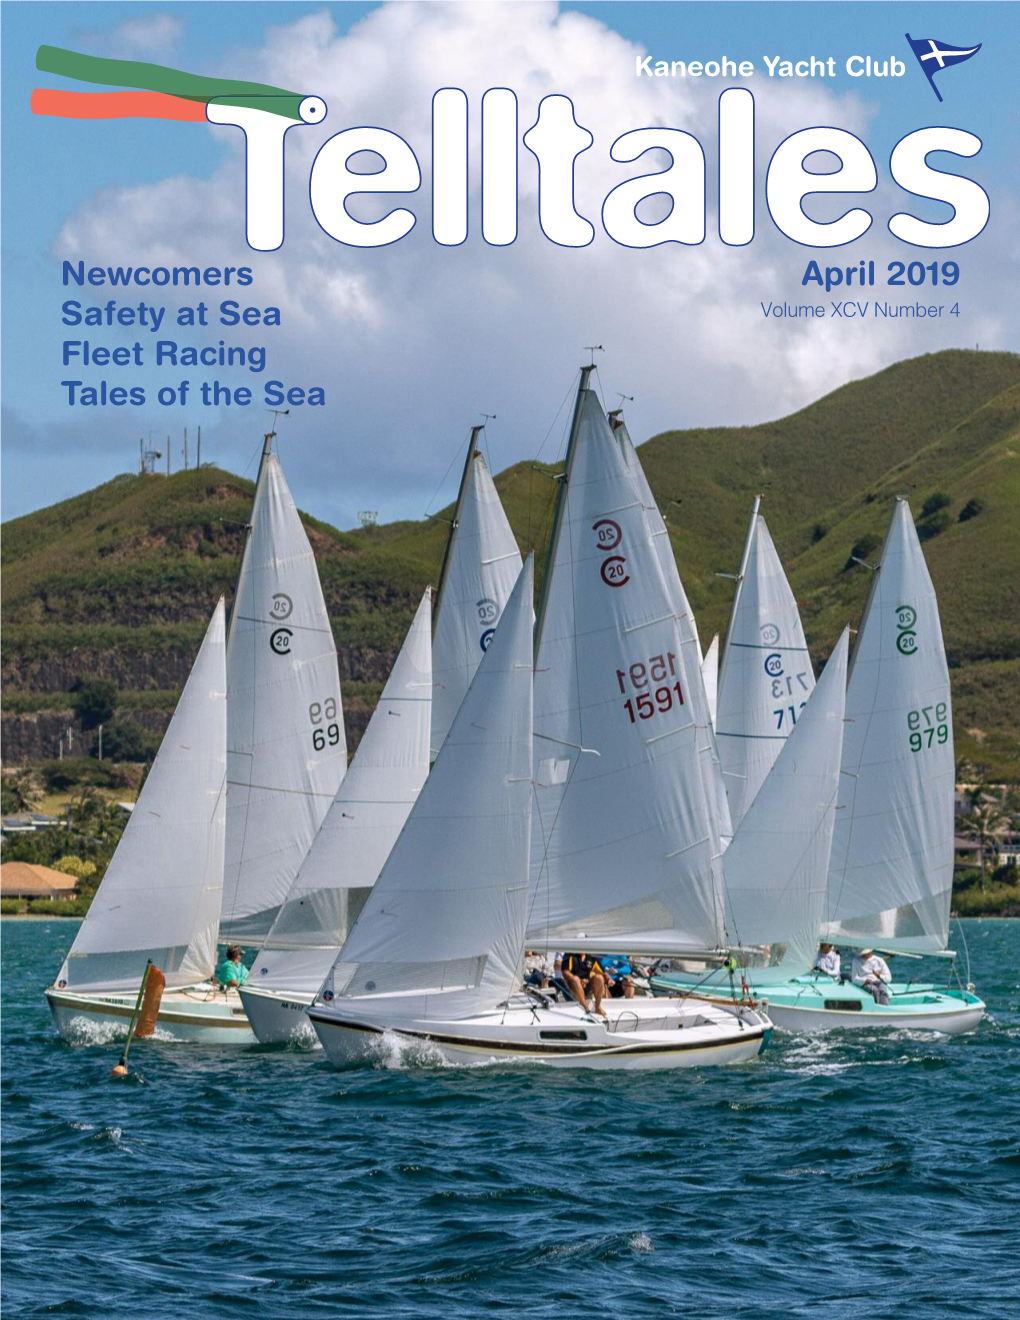 April 2019 Newcomers Safety at Sea Fleet Racing Tales of The